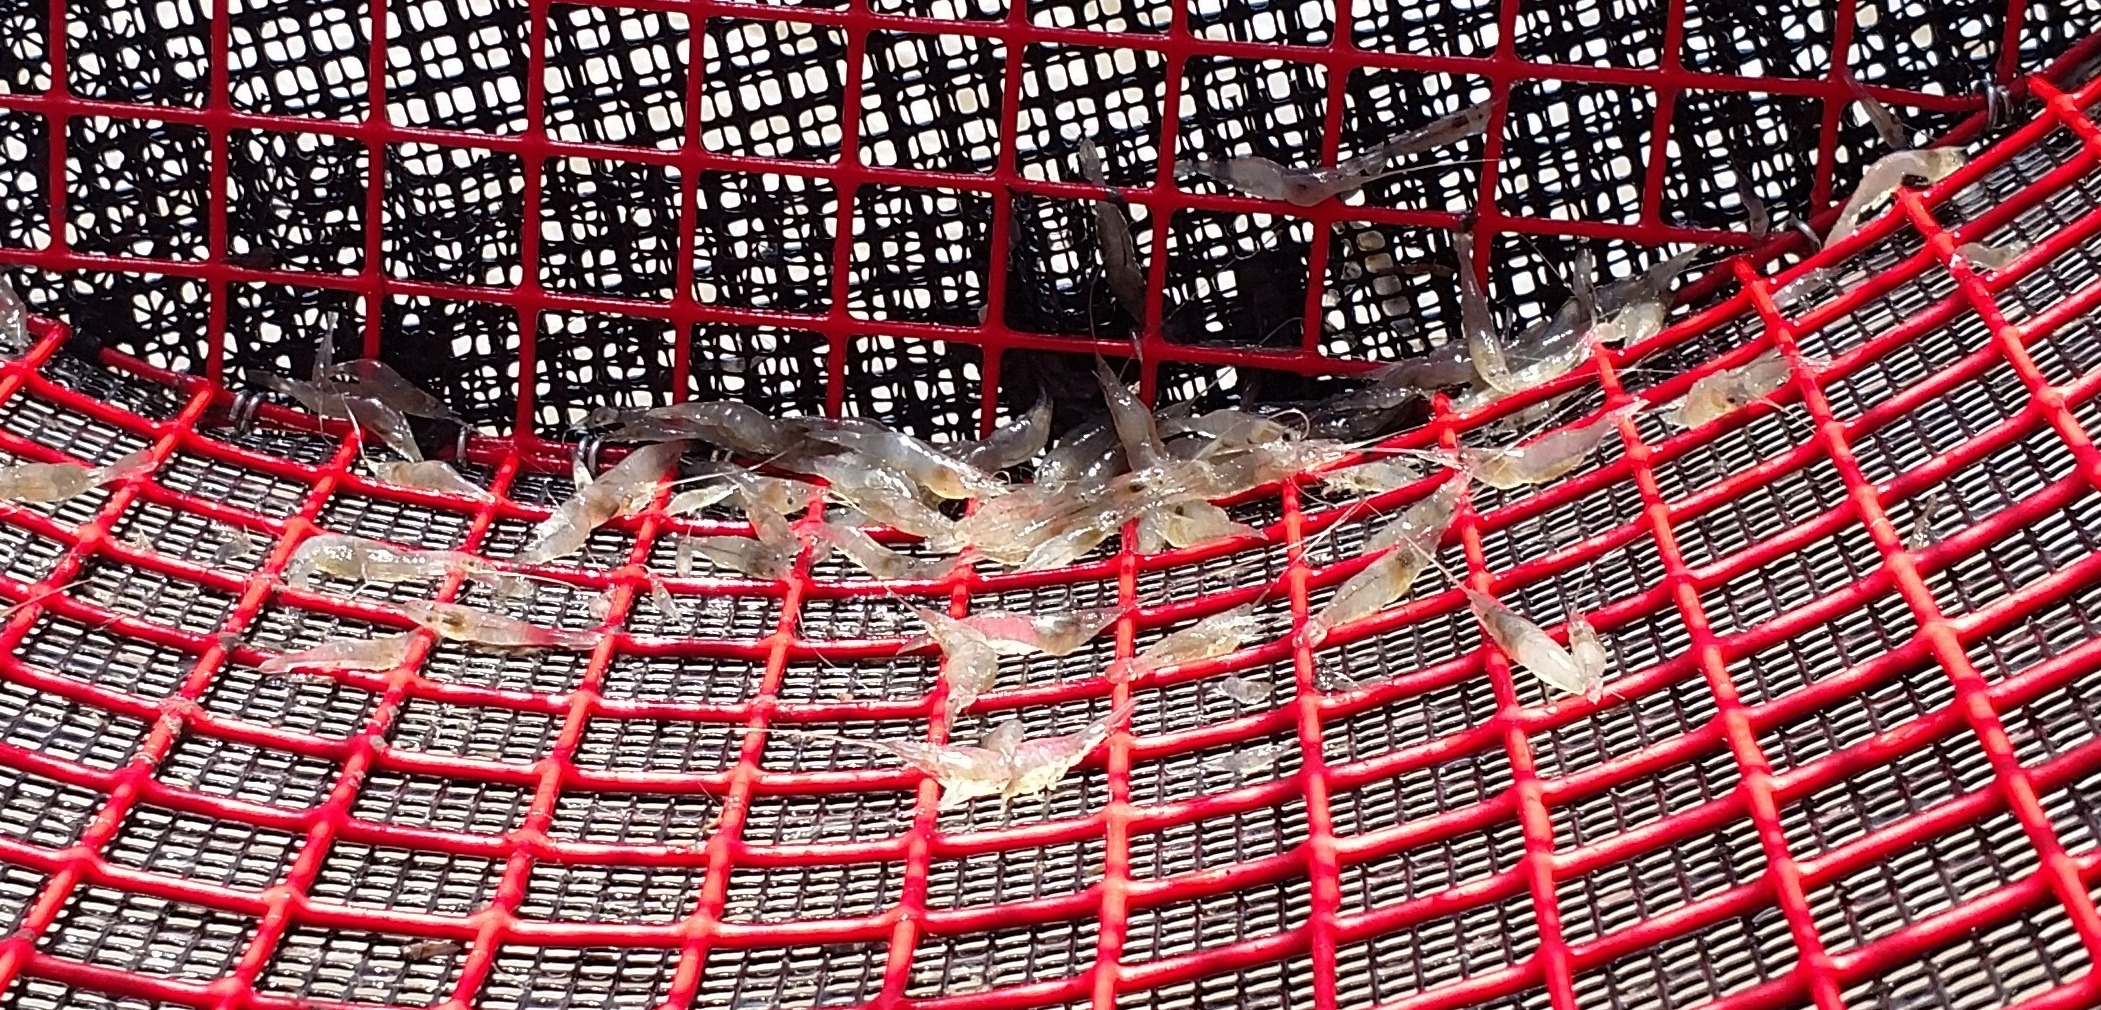 Shrimp inside cage after two weeks in the field.